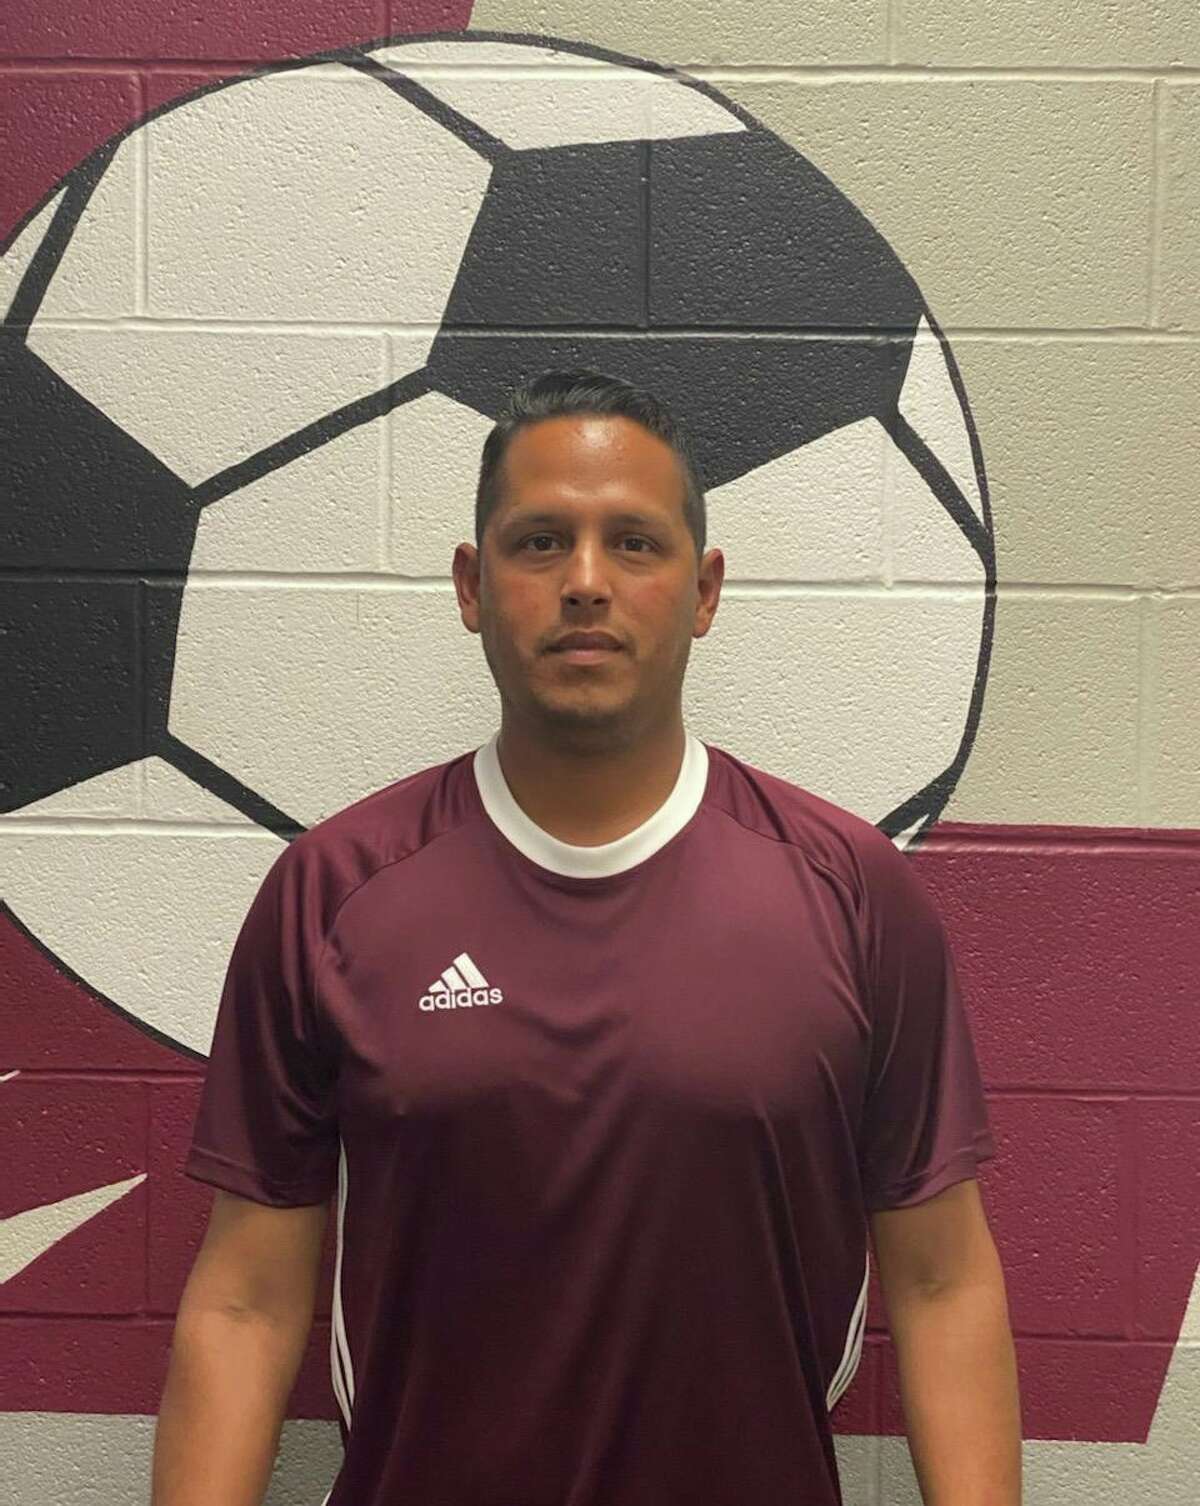 HS GIRLS SOCCER: Ruiz named new coach of the Lady Rebels